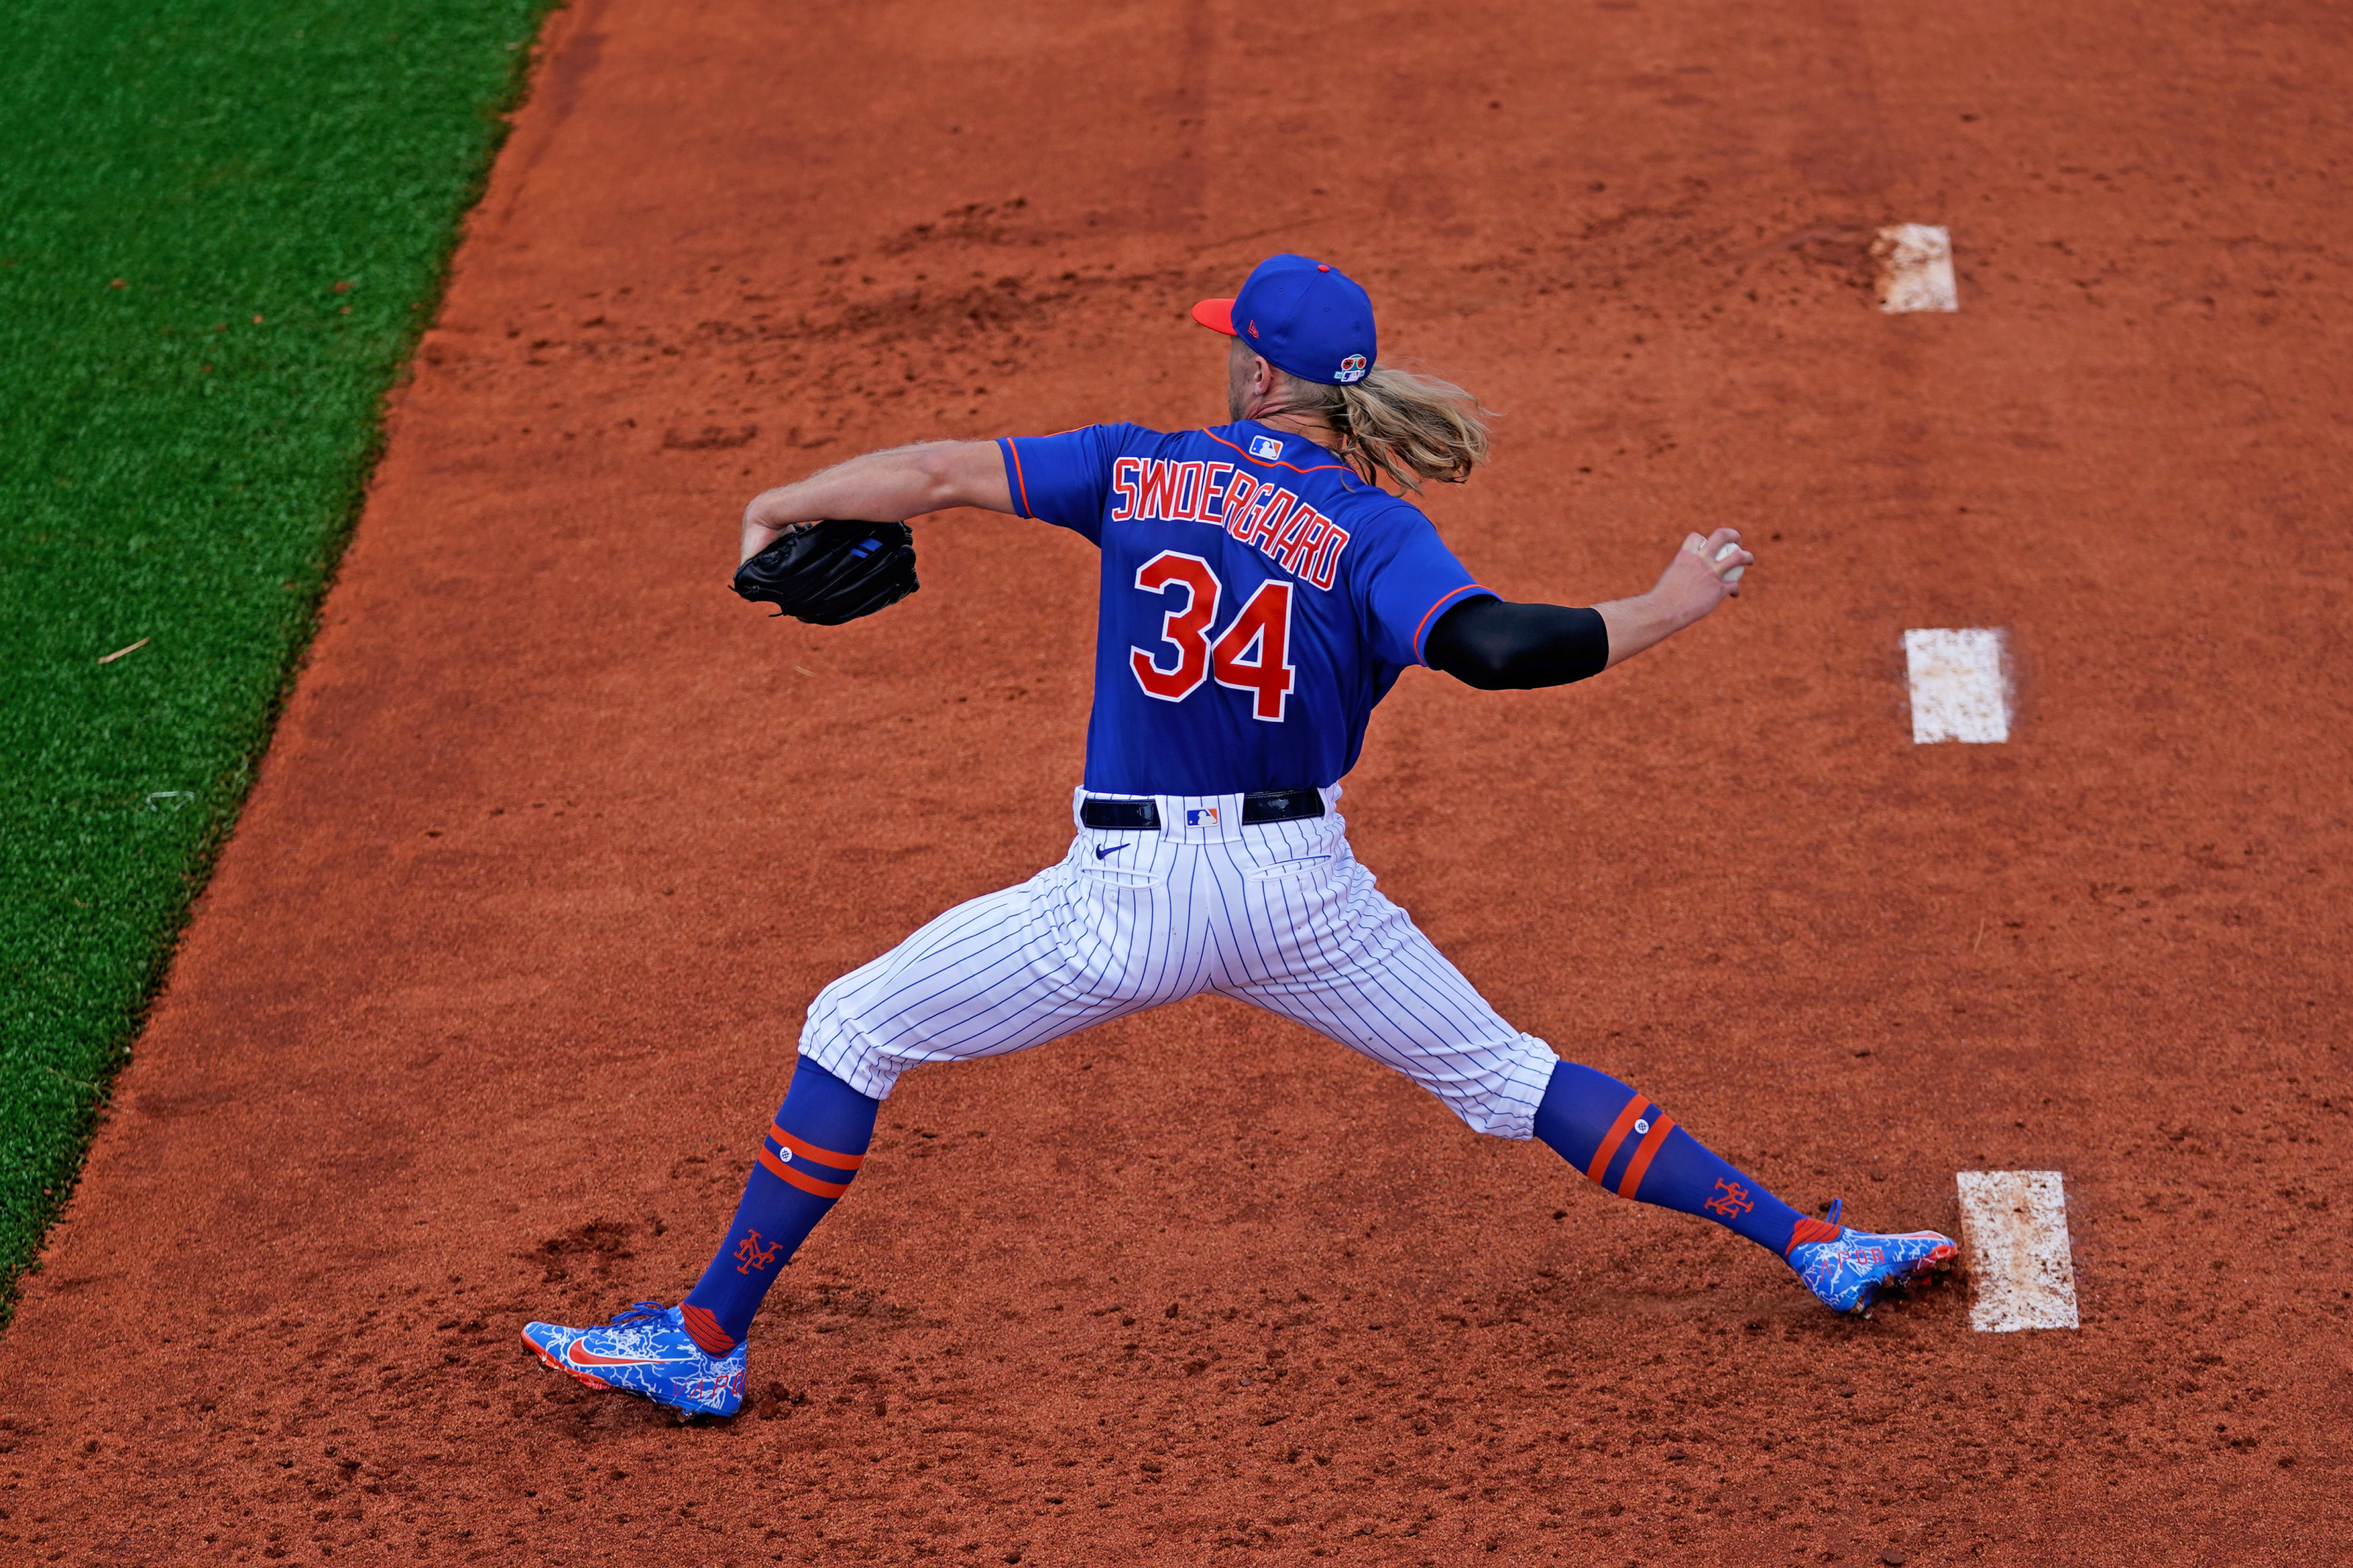 NY Mets return to Clover Park for Spring Training preparations